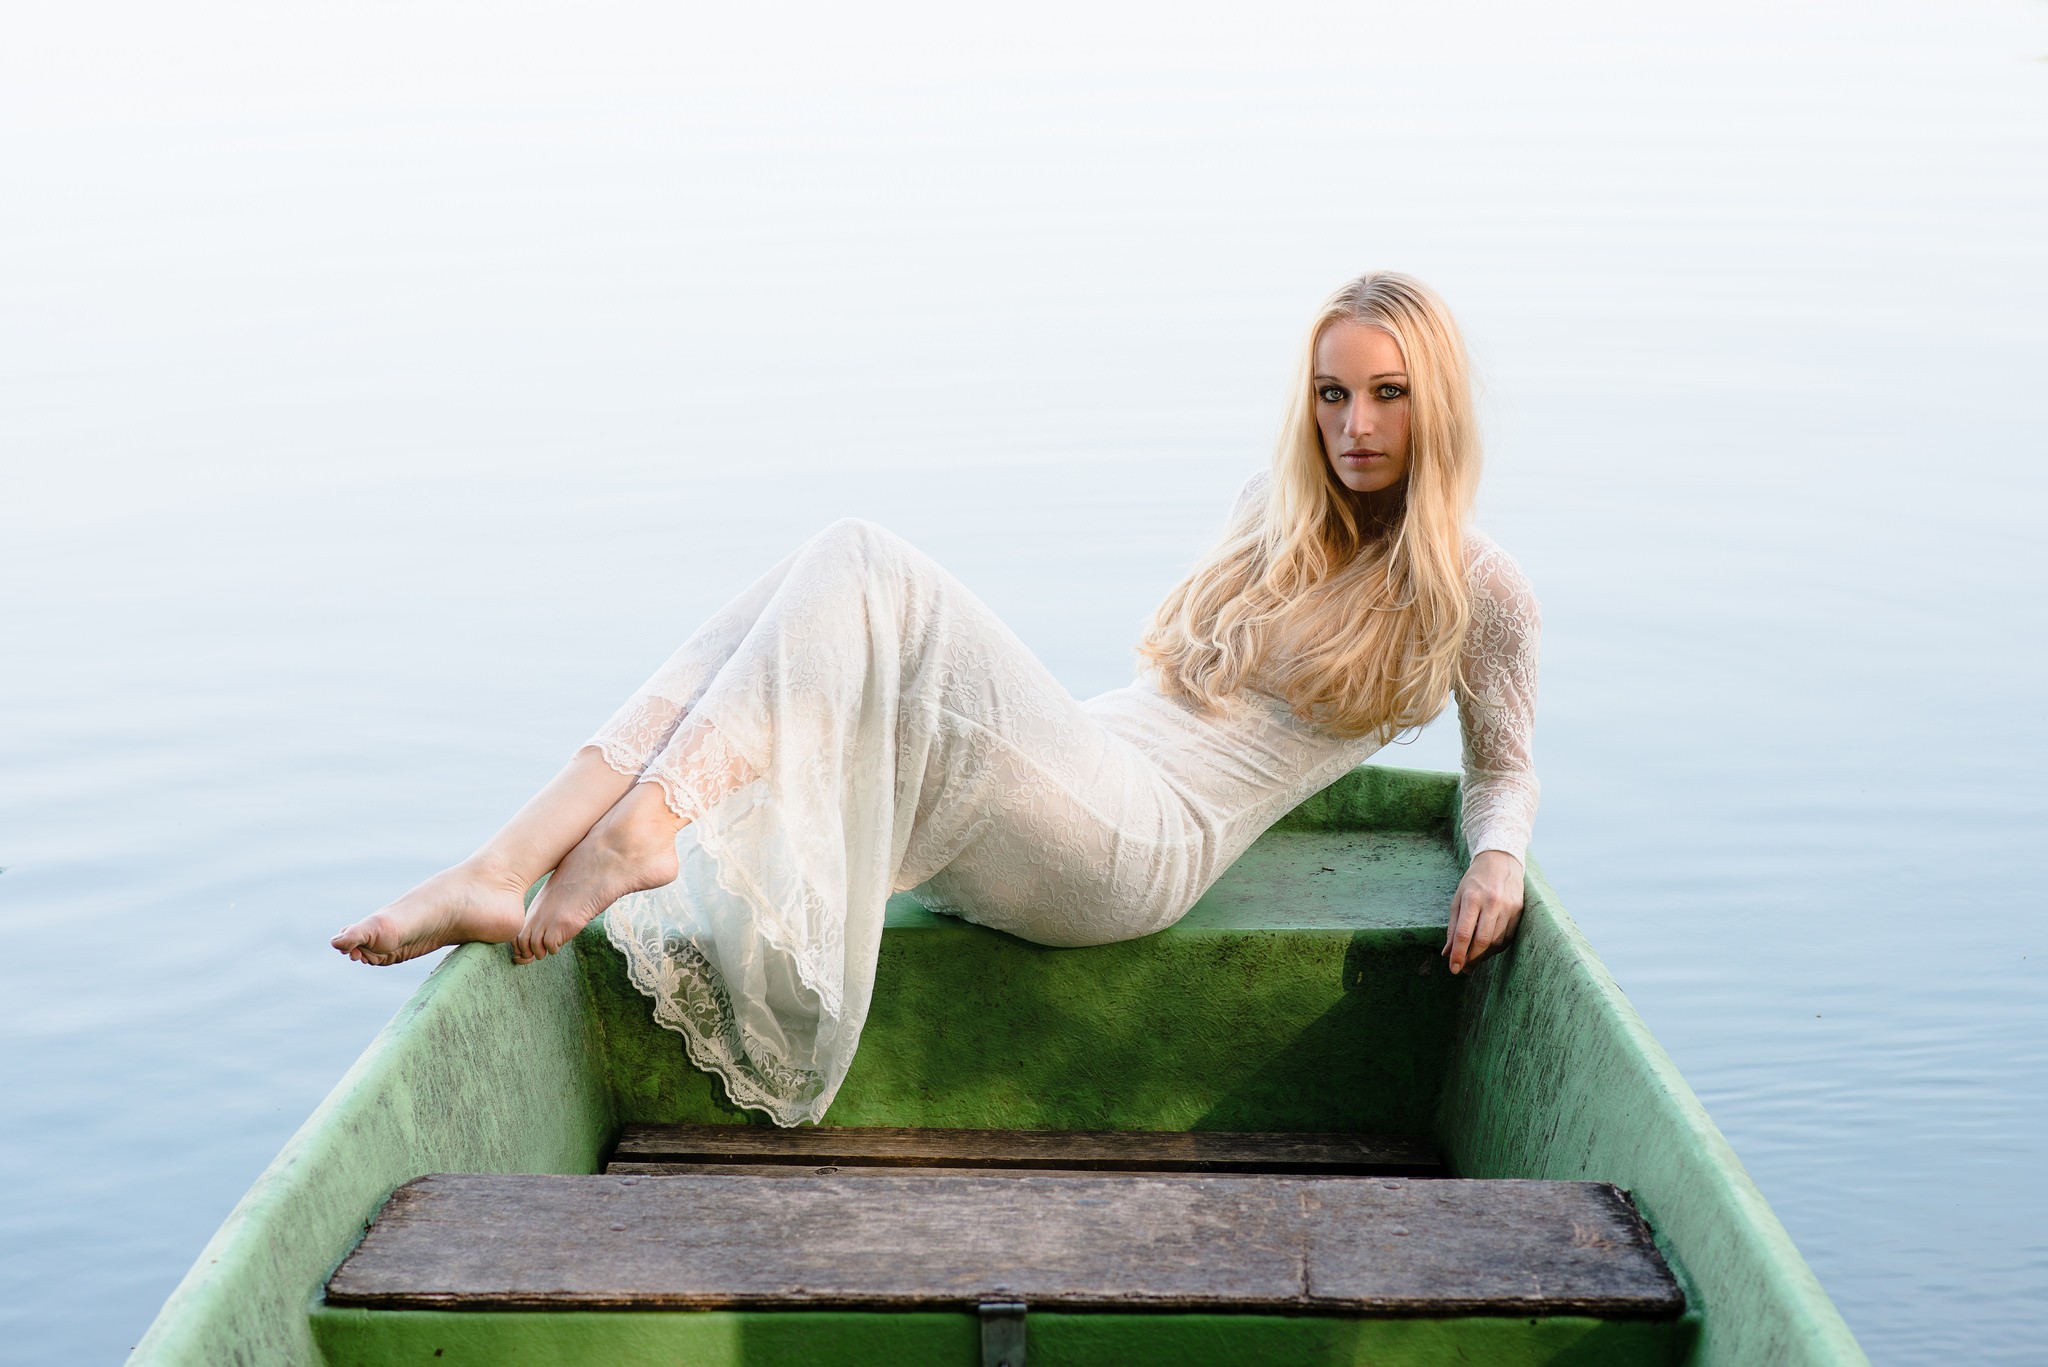 People 2048x1367 women women outdoors model boat vehicle outdoors long hair barefoot water looking at viewer white clothing blonde feet pressed